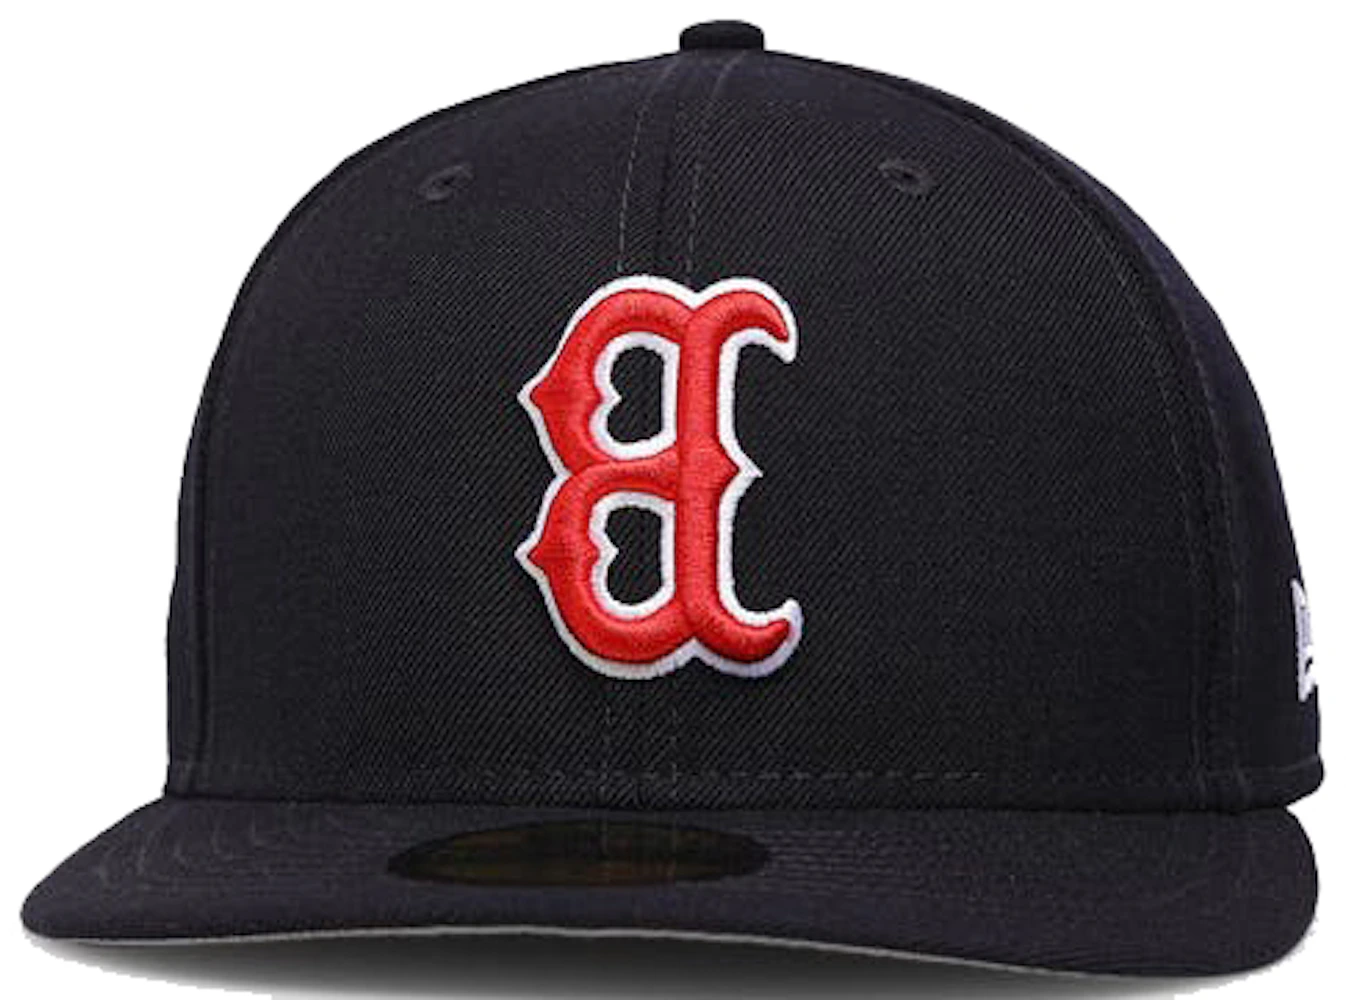 New Era Boston Red Sox Upside Down 59Fifty Fitted Hat Navy Men's - FW21 - US